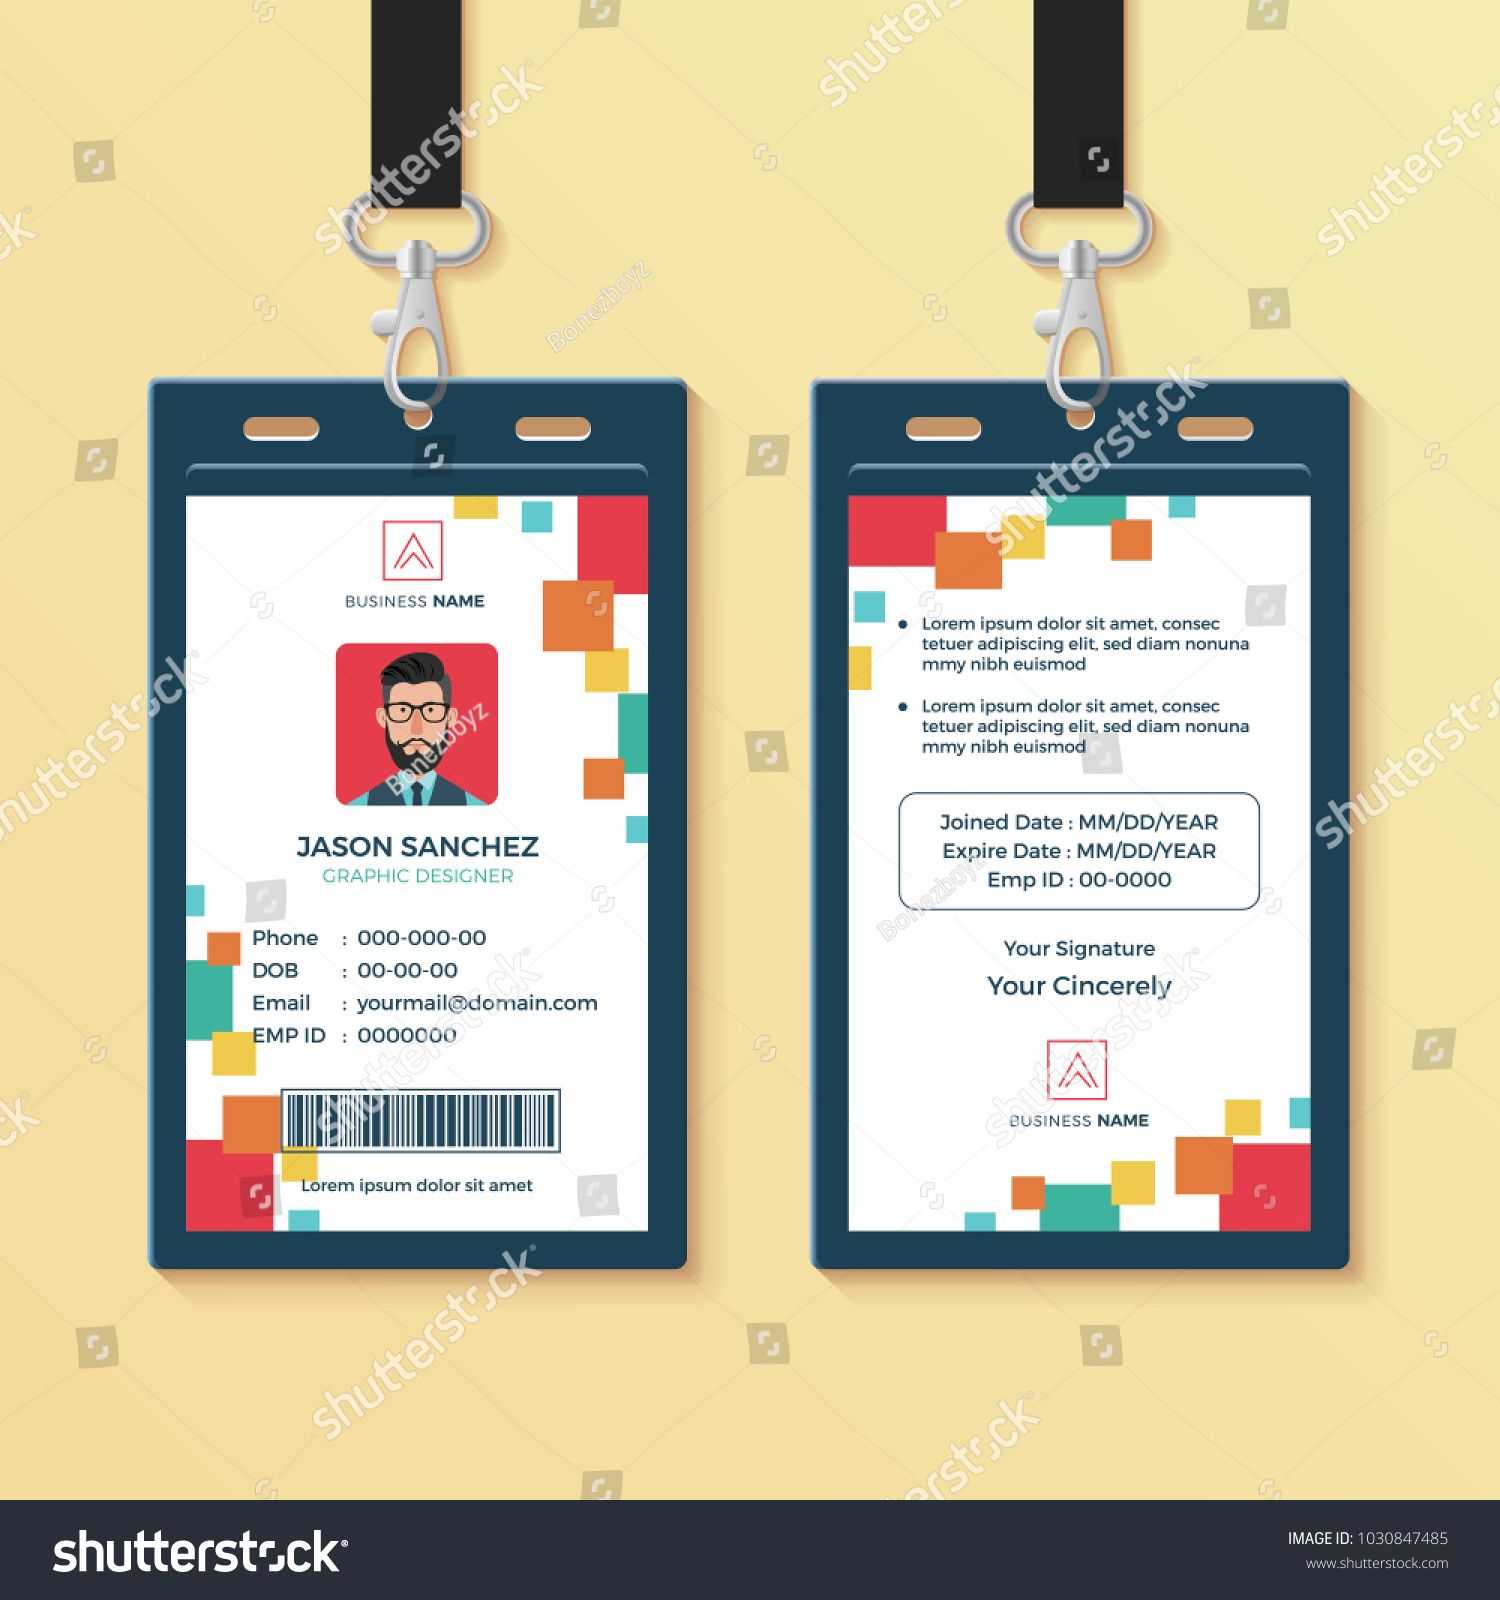 Creative Id Card Template, Perfect For Any Types Of Agency Inside Media Id Card Templates